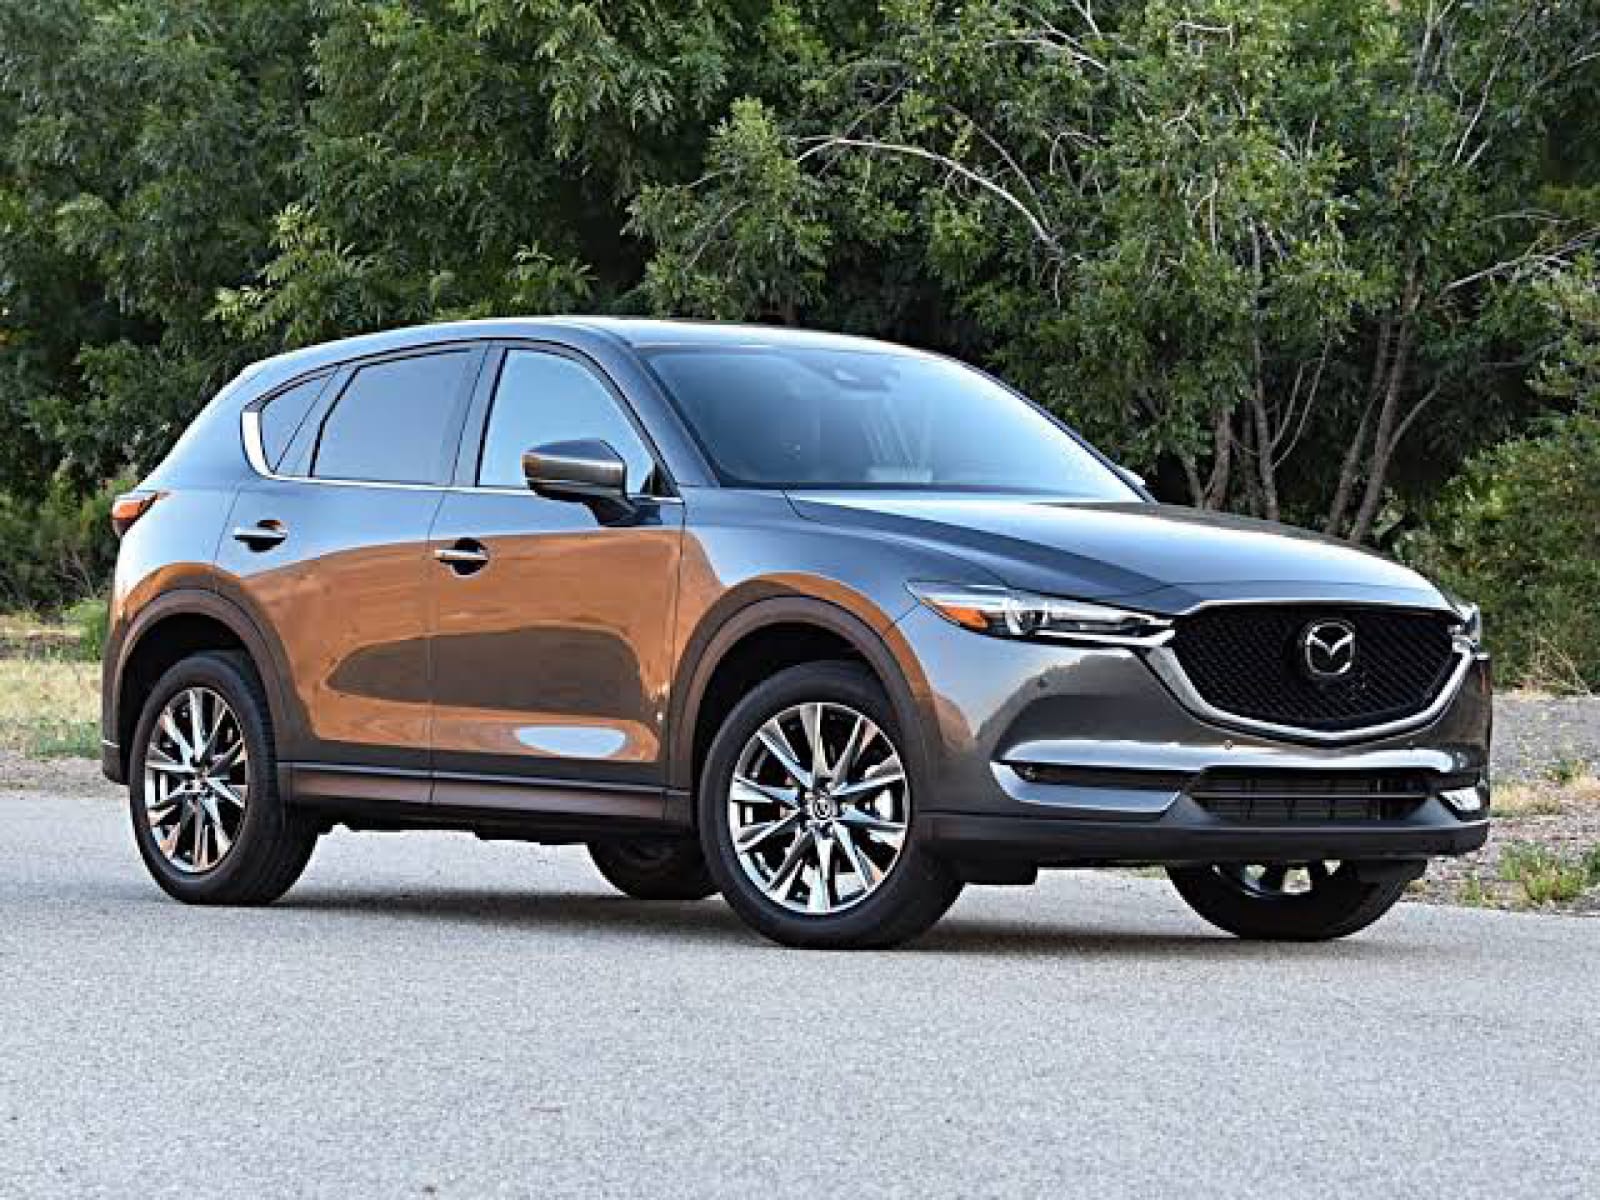 Mazda CX-5 For Hire Lease Rental in Kenya Best prices all cars available